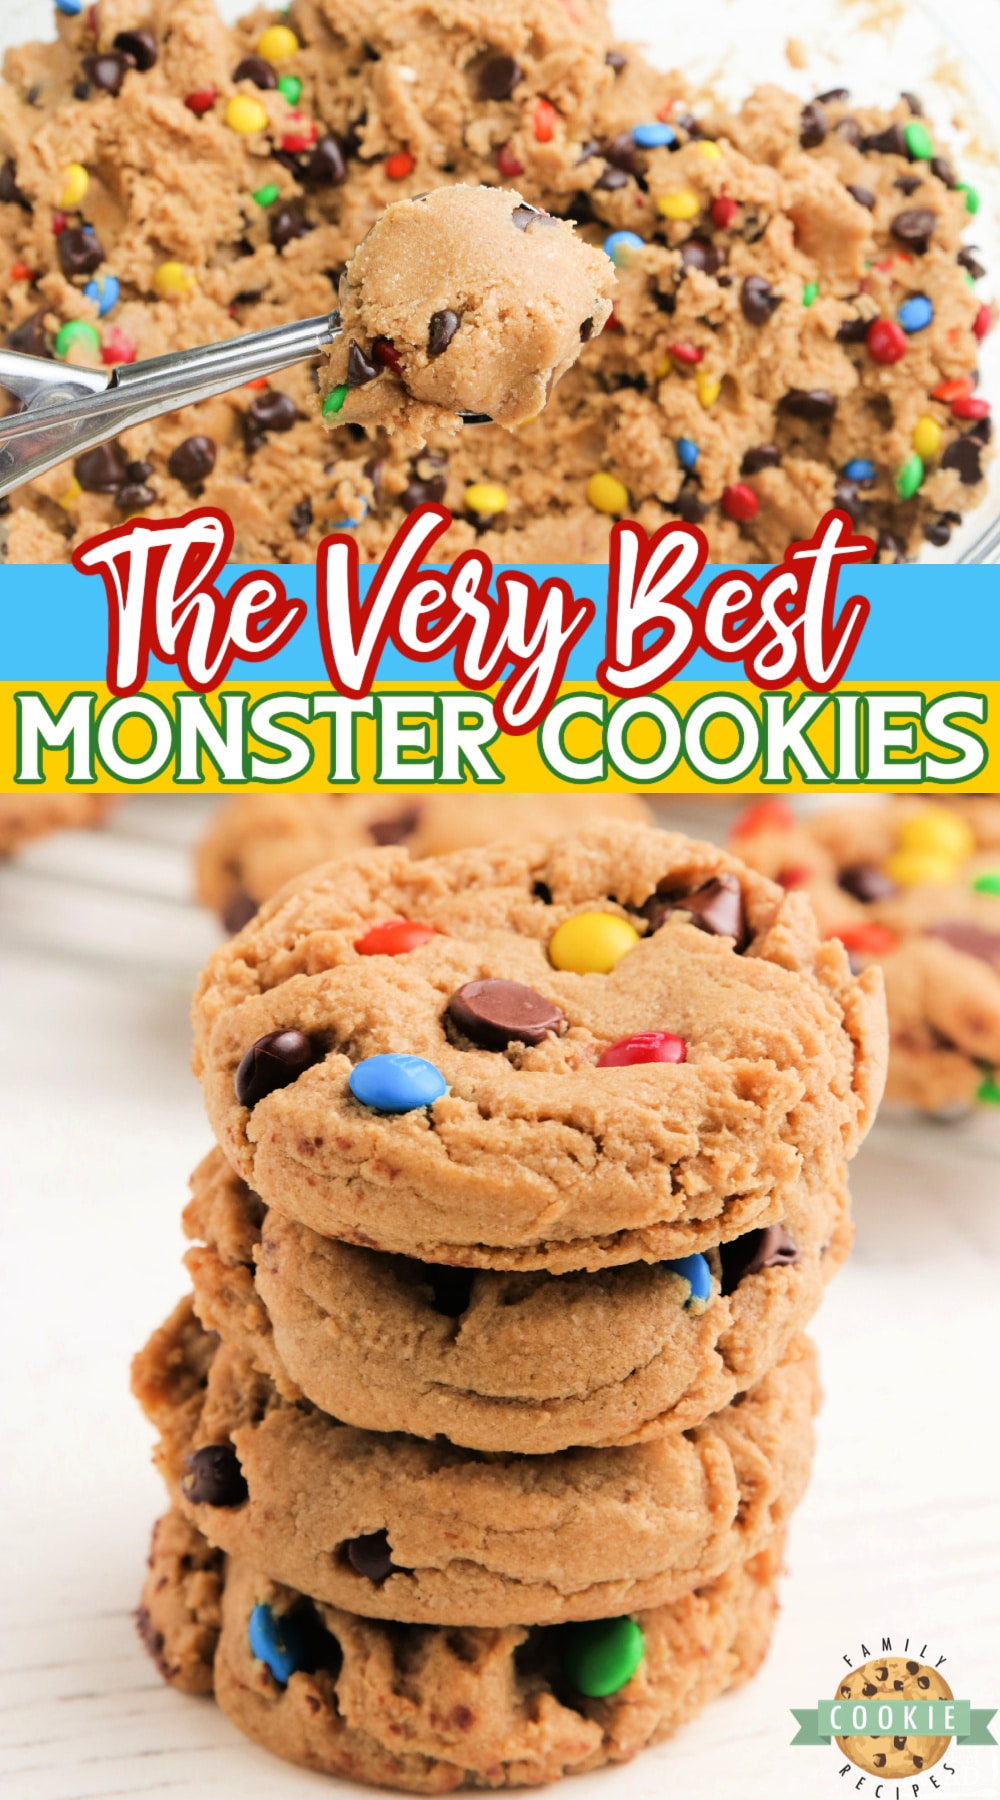 The Best Monster Cookies are made with peanut butter, chocolate chips, M&Ms and oatmeal! All of your favorite cookie flavors combined in one delicious cookie!